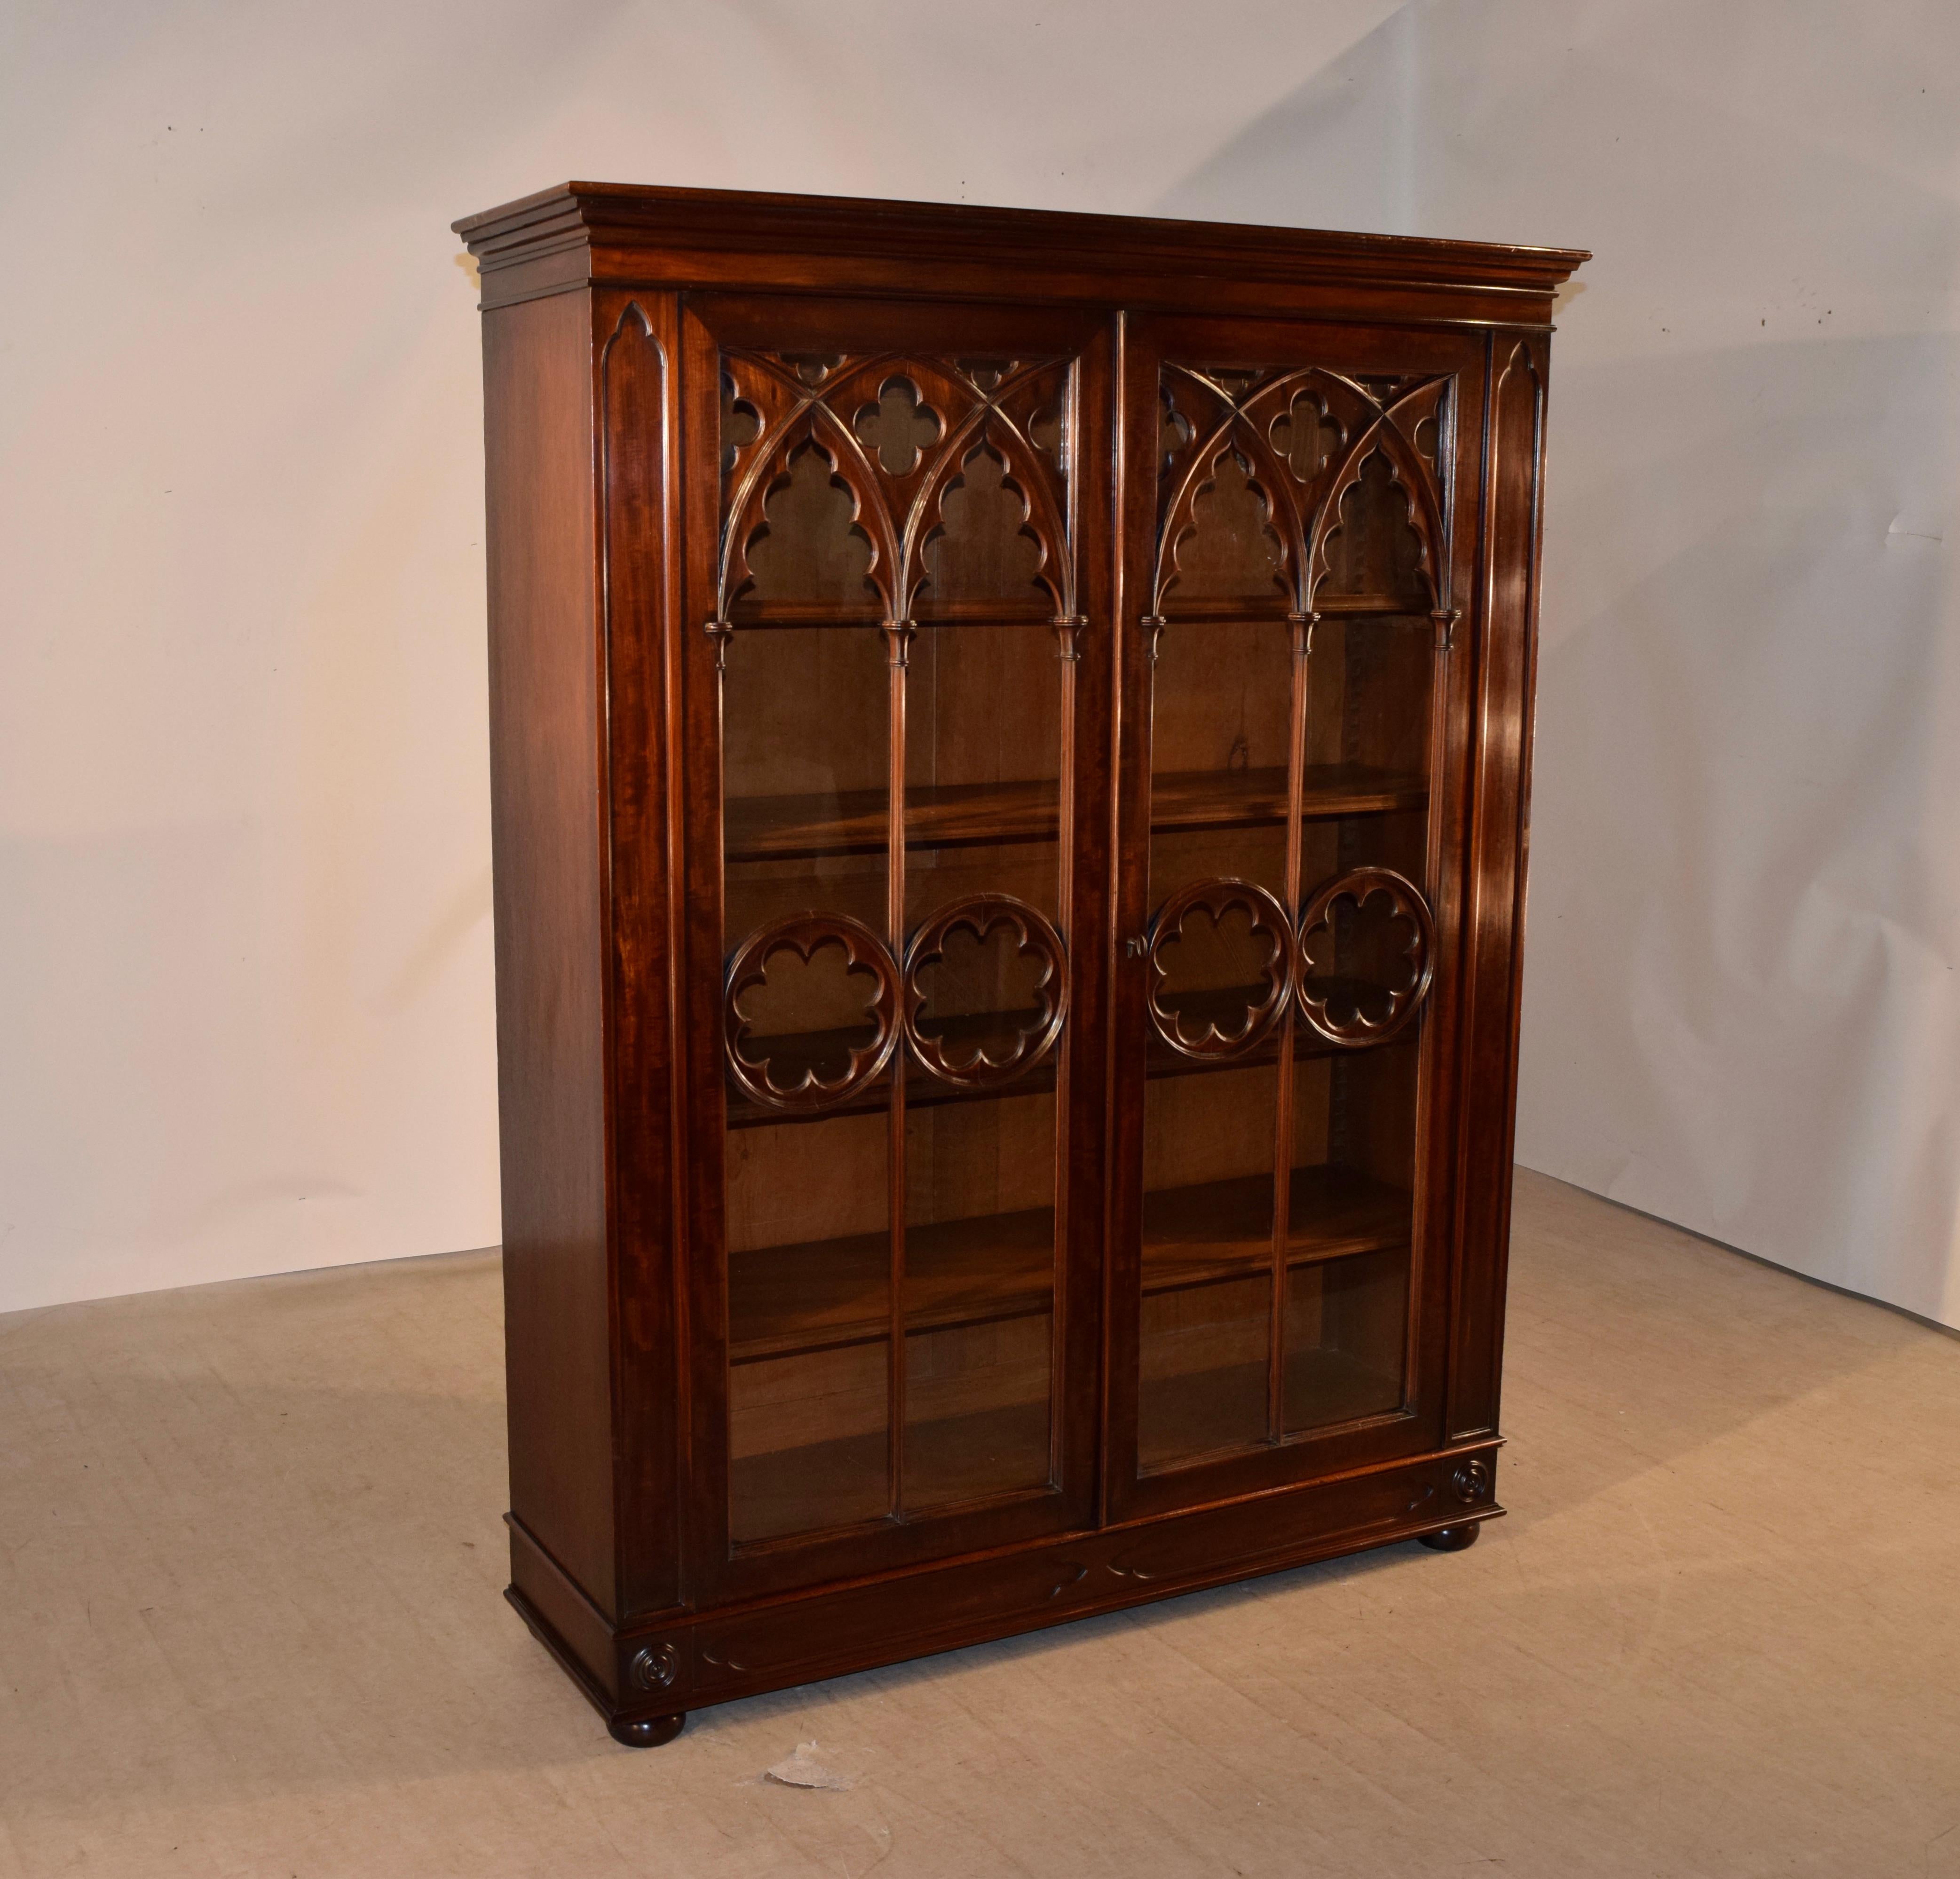 19th century mahogany bookcase from England of the Gothic period. The case has an upper crown over a simple case with wonderfully glazed doors that have hand routed and scalloped Gothic moldings. The doors open to reveal five shelves, four of which